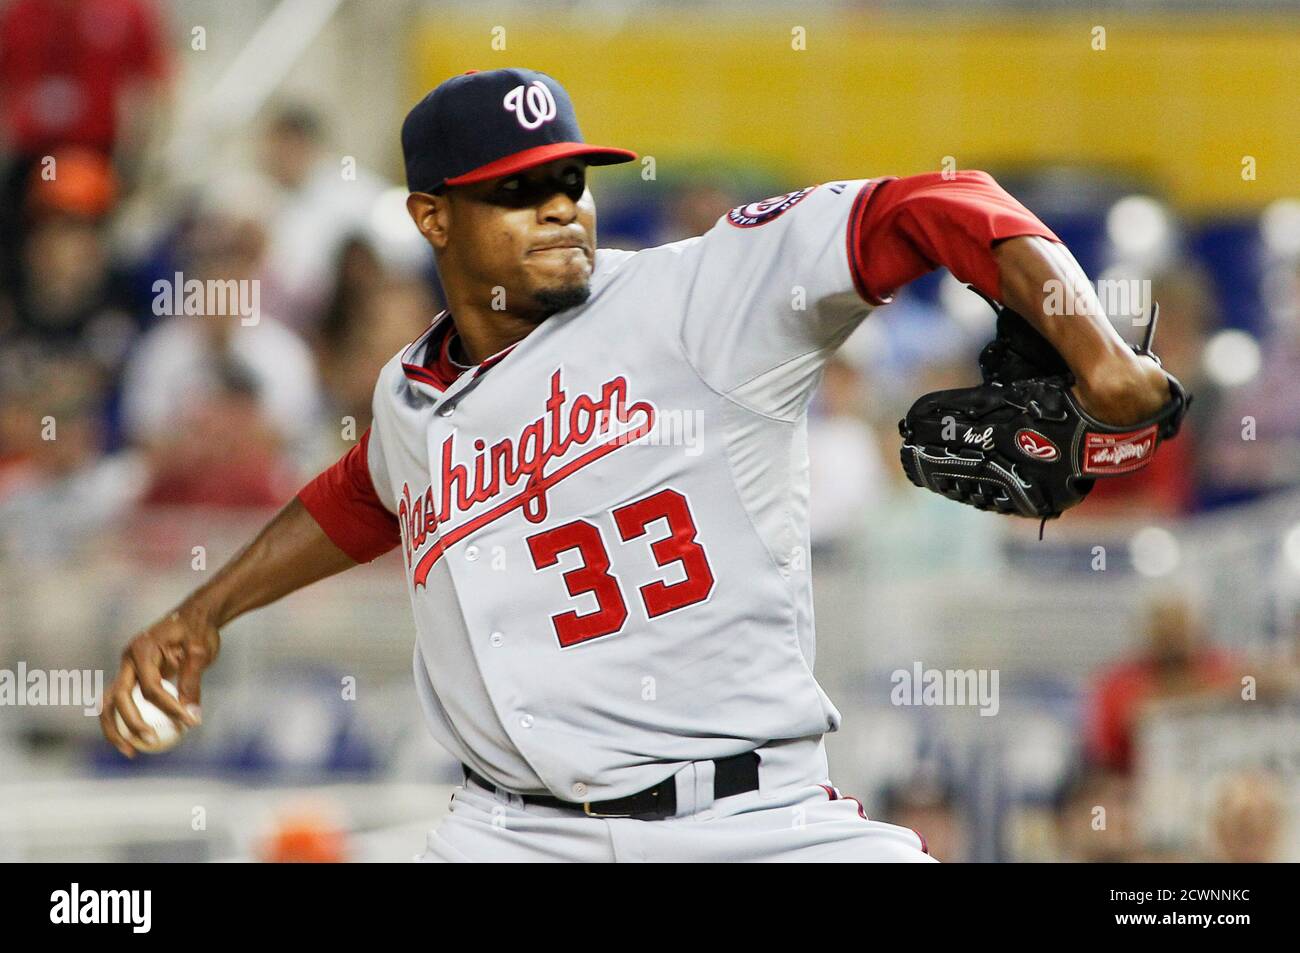 Washington Nationals starting pitcher Edwin Jackson throws against the Miami Marlins in the first inning during their MLB baseball game in Miami July 16, 2012. REUTERS/Joe Skipper  (UNITED STATES - Tags: SPORT BASEBALL) Stock Photo